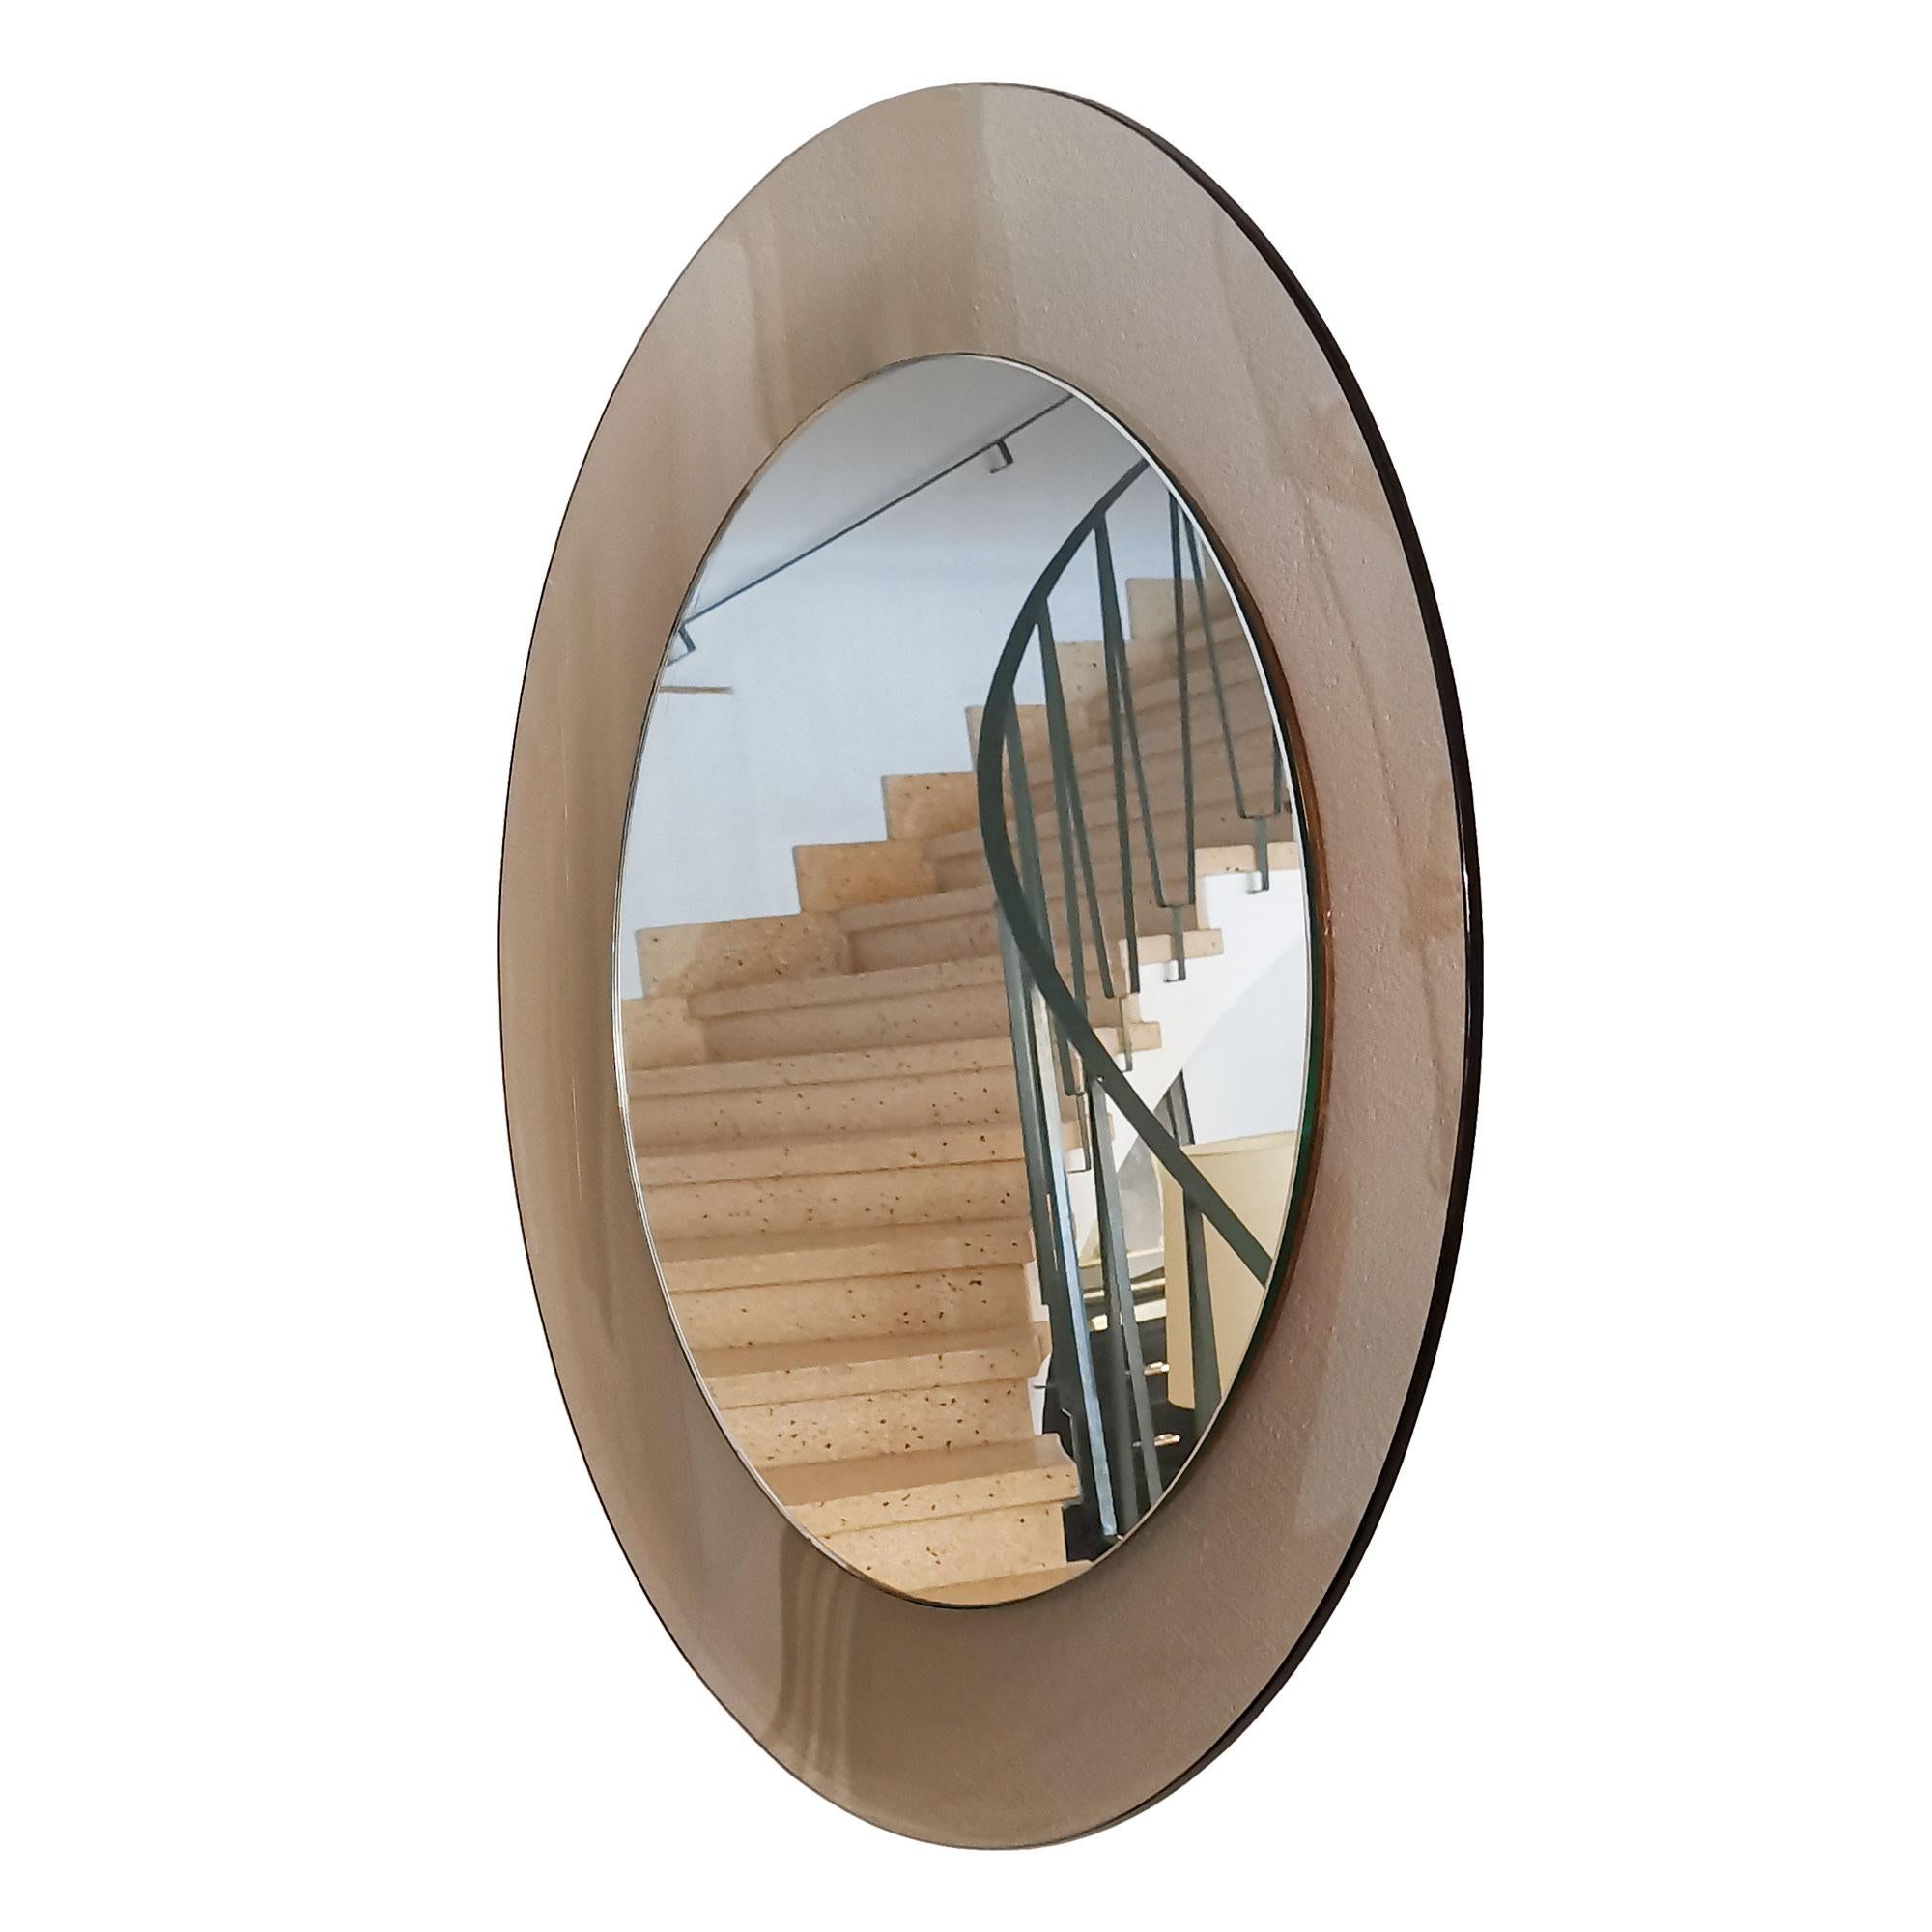 Large round bathroom mirror, smoked gray curved glass frame.

Italy c. 1960.